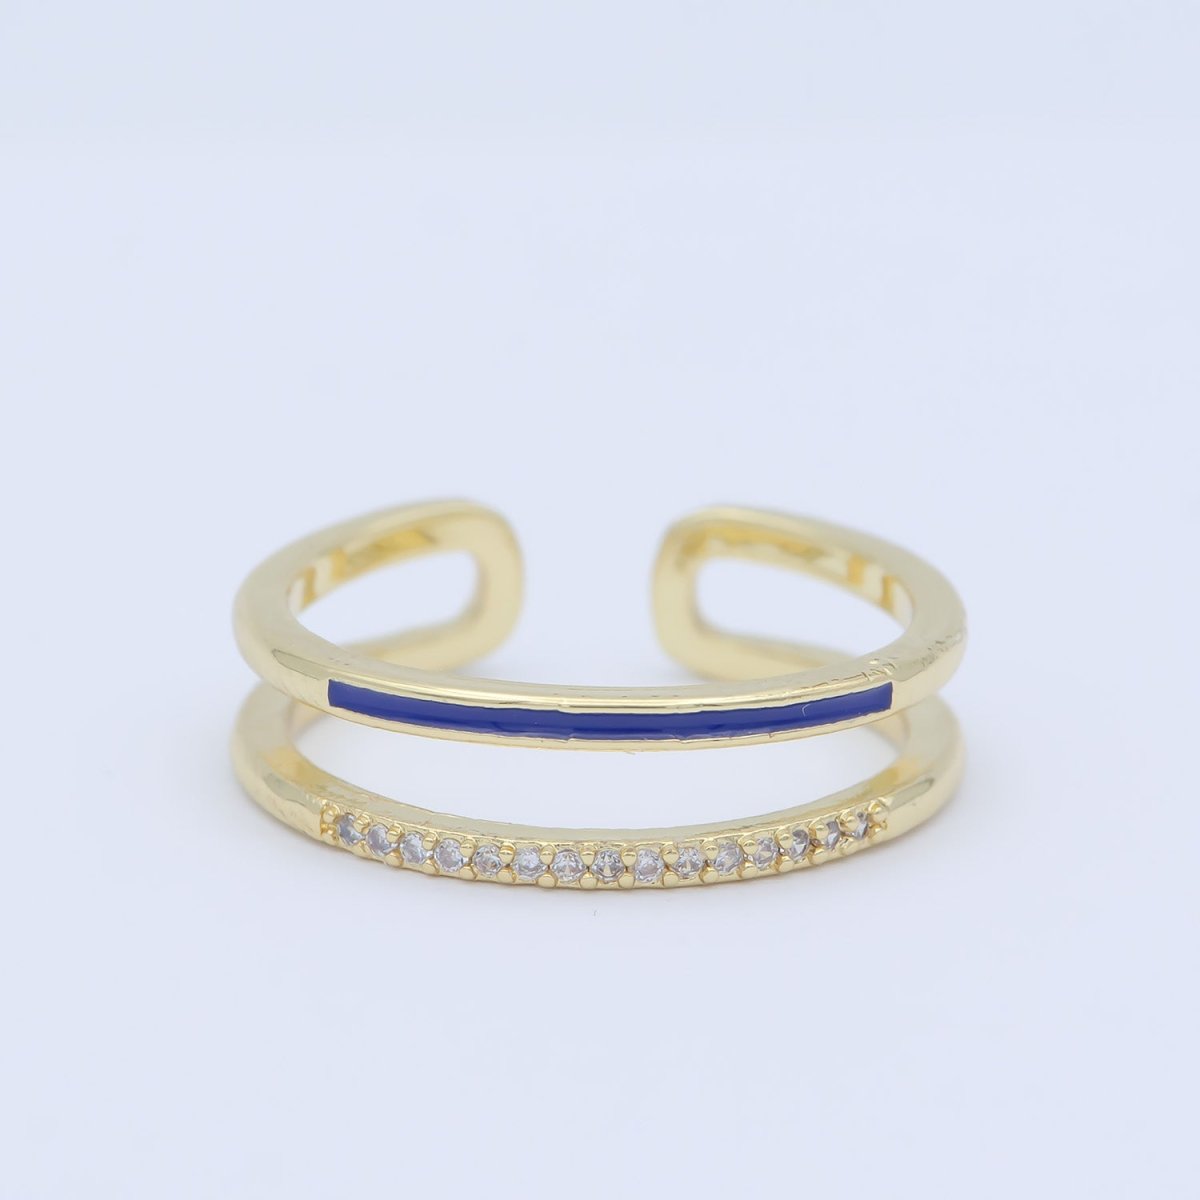 Assorted Color Golden Ring CZ Crystal on Double Layers Plain Gold Filled Micro Pave Ring Jewelry O-962 to O-971 - DLUXCA